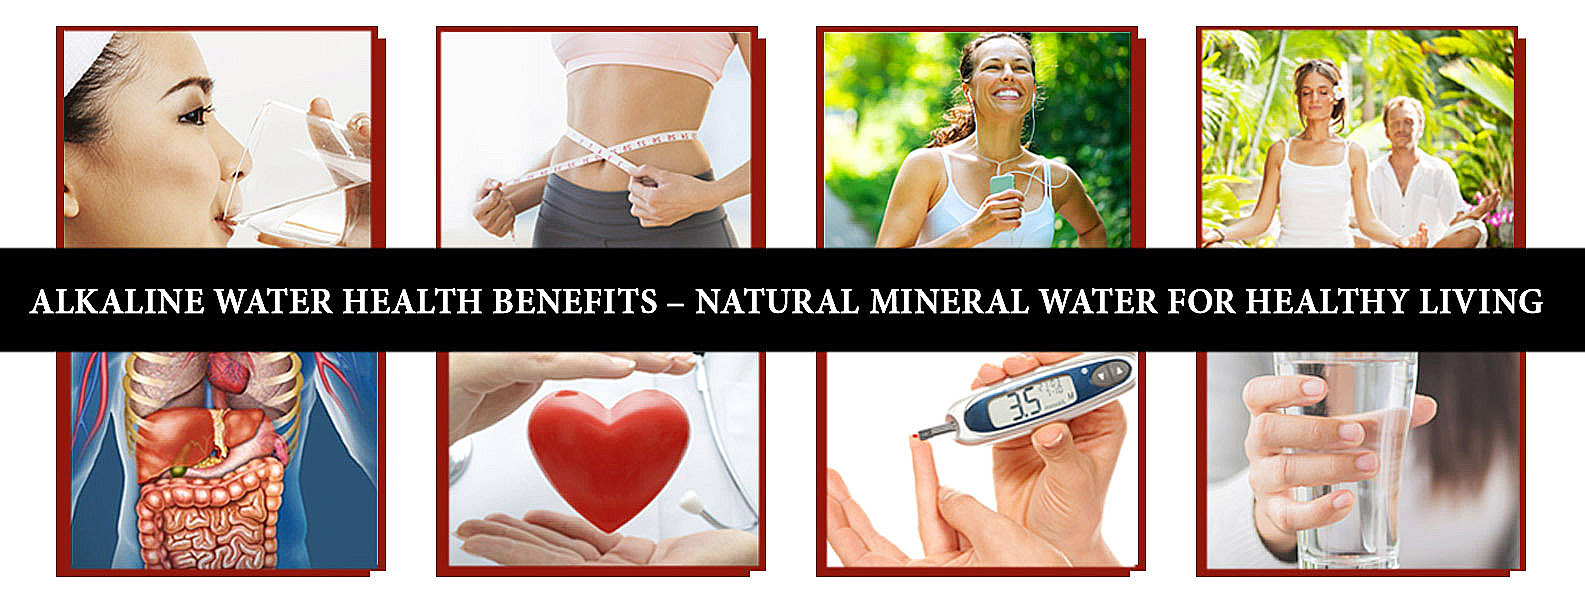 Top 11 Alkaline Water Health Benefits – Natural Mineral Water for Healthy Living